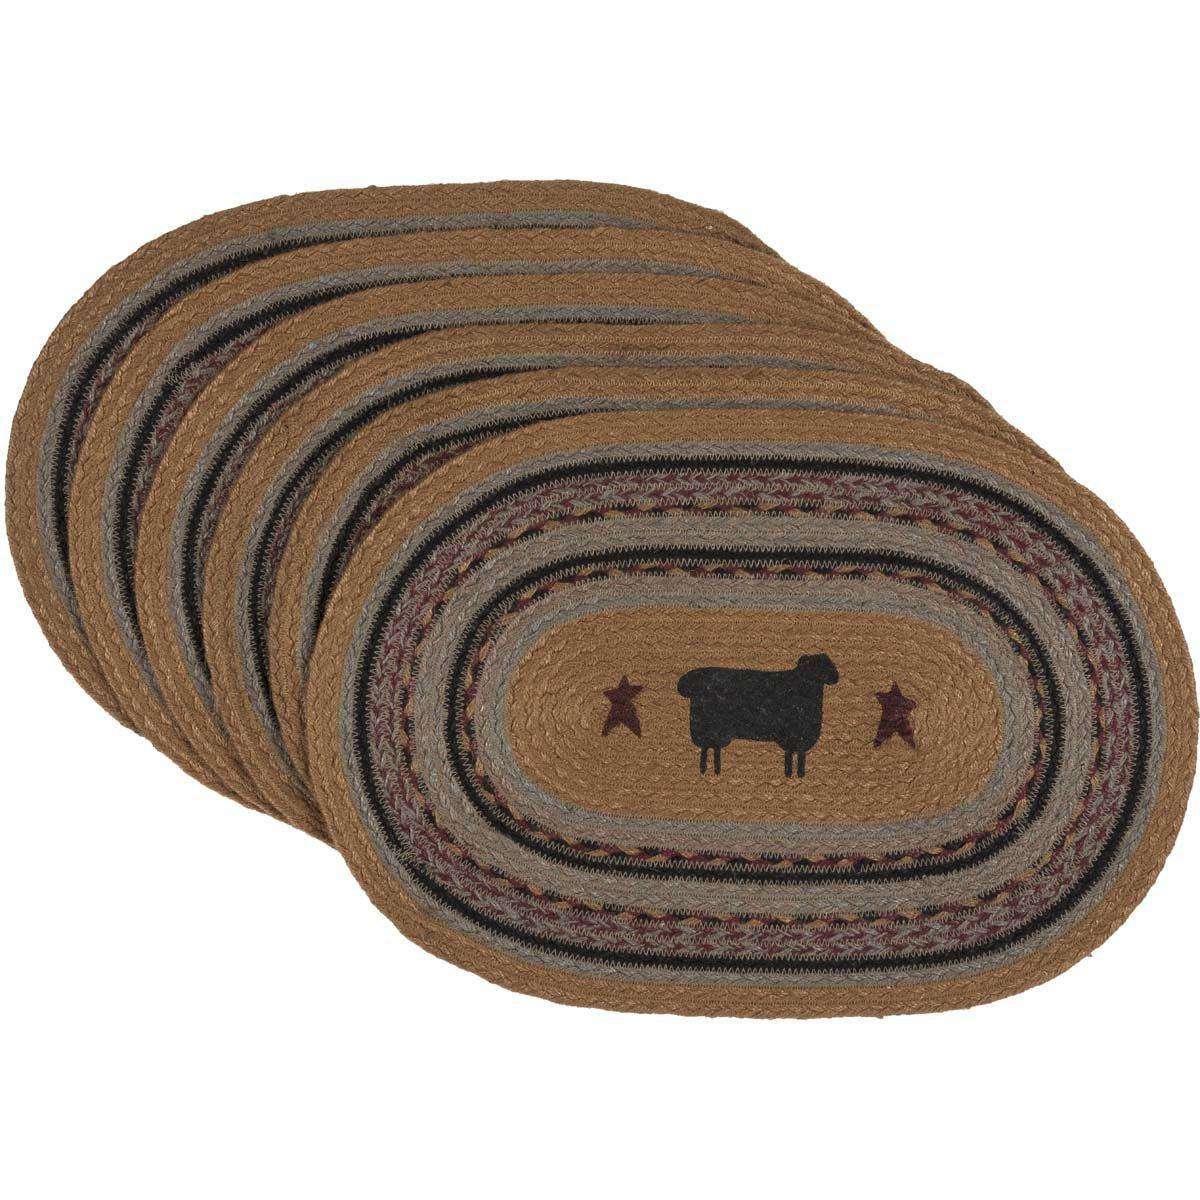 Heritage Farms Sheep Jute Braided Placemat Set of 6 VHC Brands - The Fox Decor